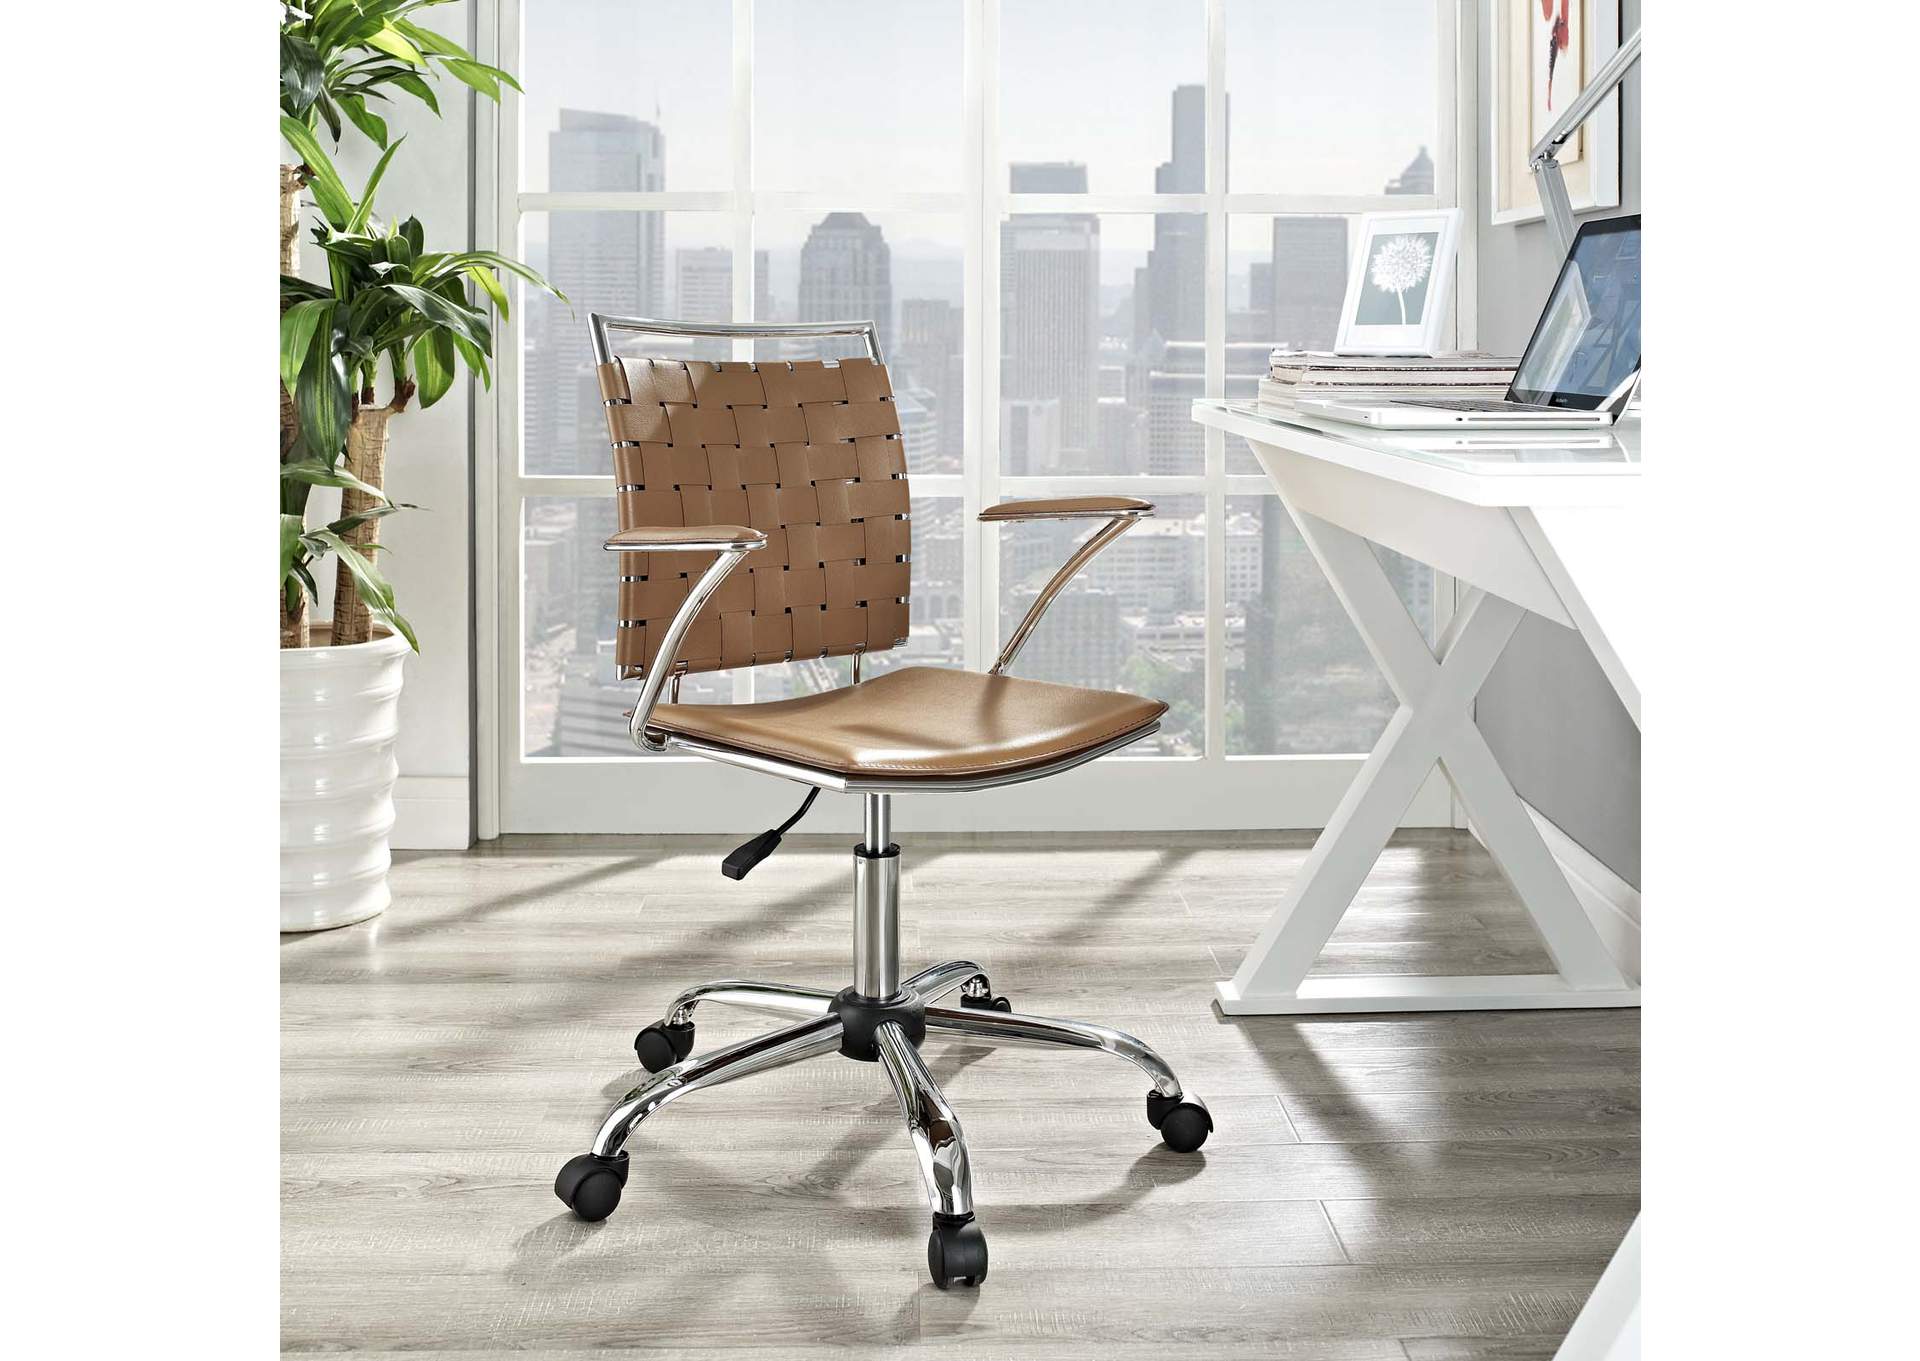 Tan Fuse Office Chair,Modway